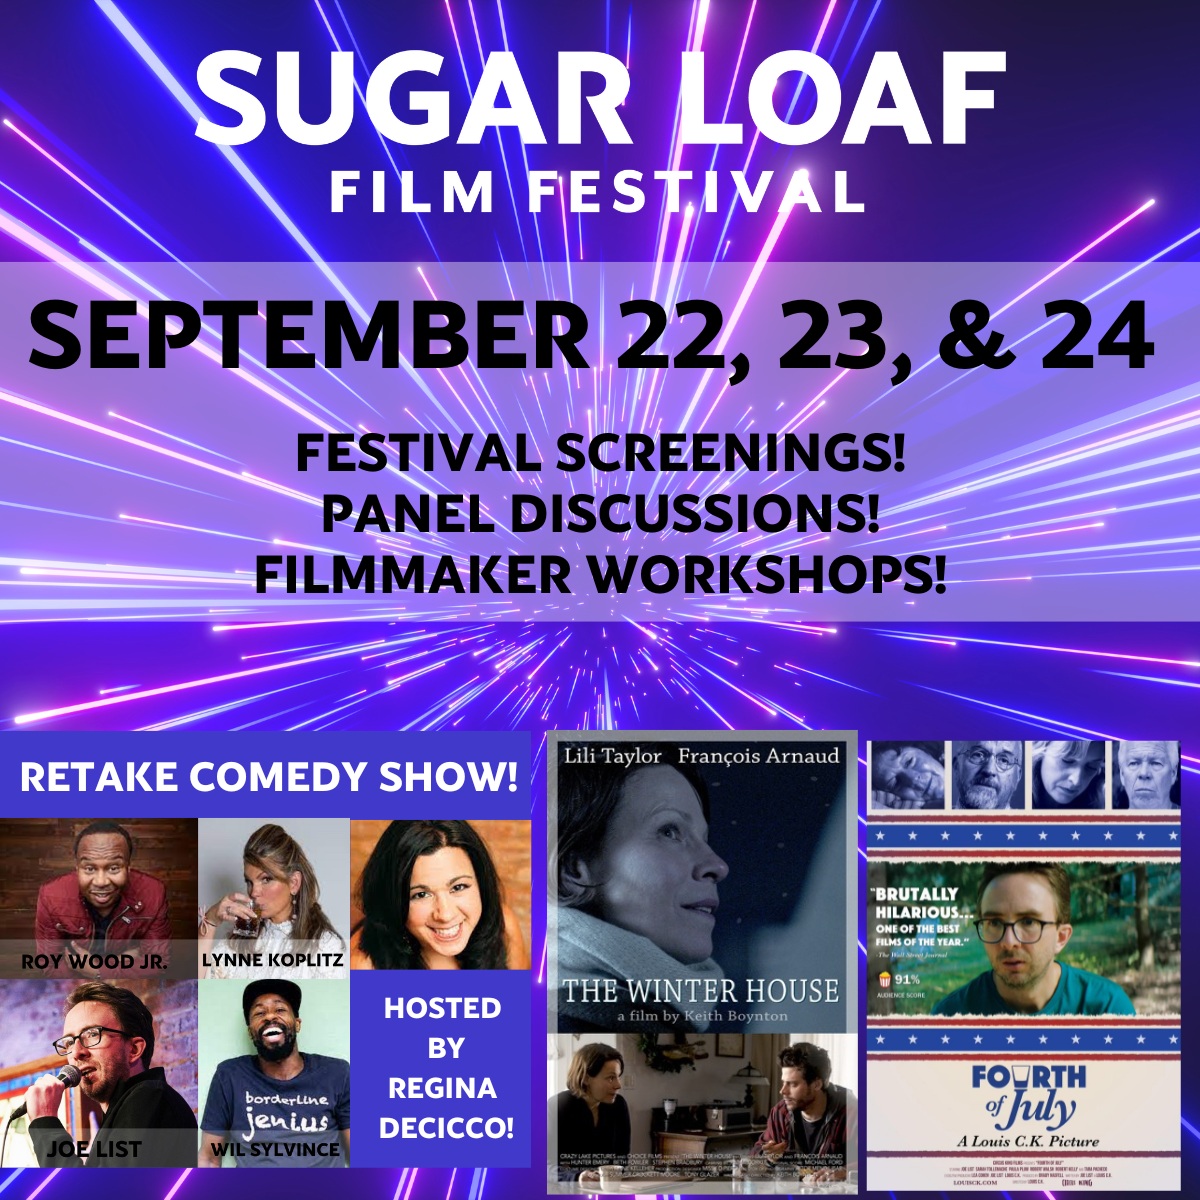 Good News, Movie Fans! The First-Ever Sugar Loaf Film Festival Comes to Orange County, N.Y., in September